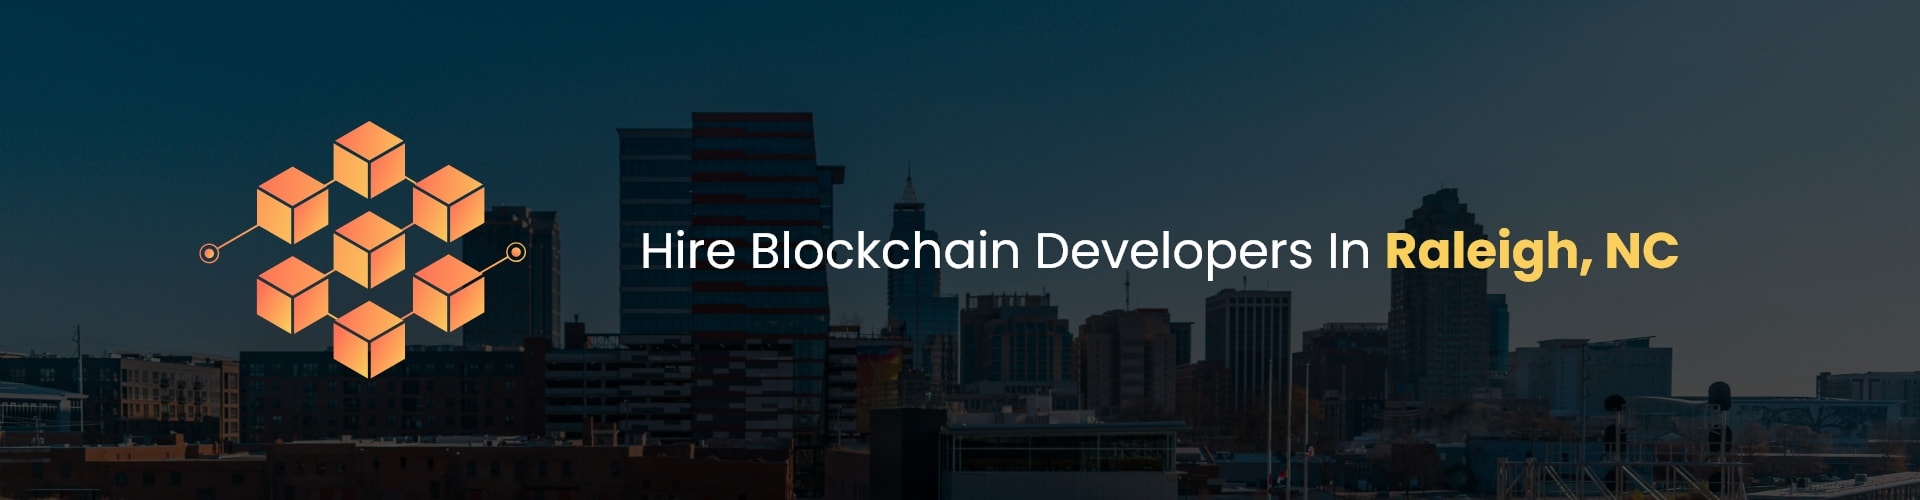 hire blockchain developers in raleigh